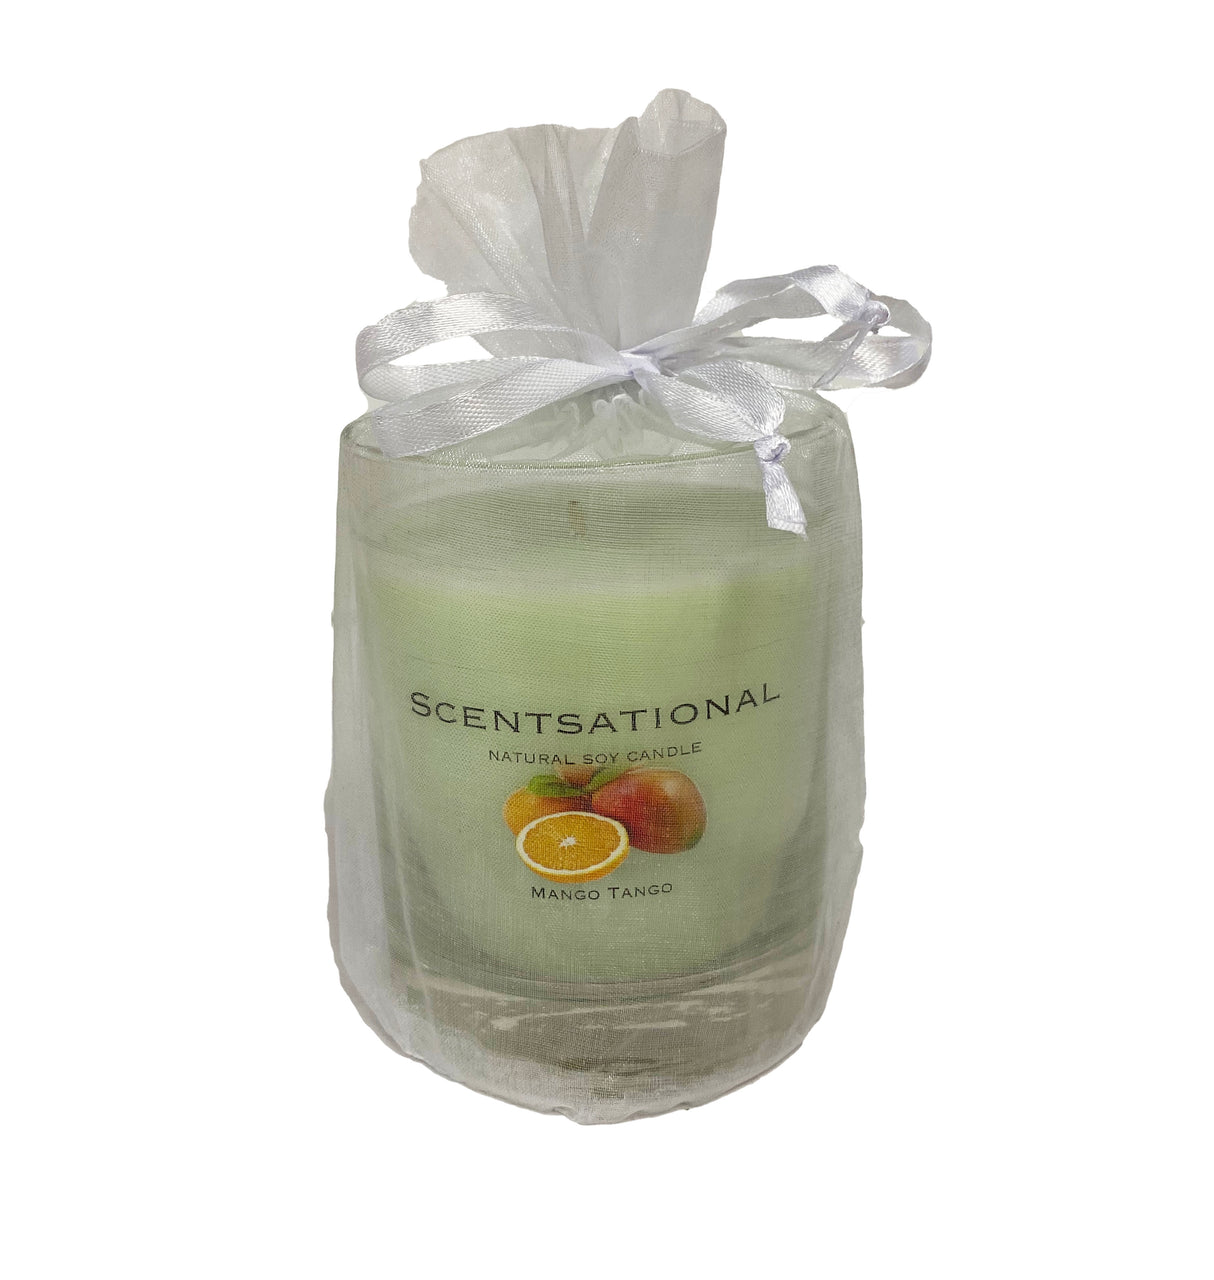 Scented Candles, 11 oz